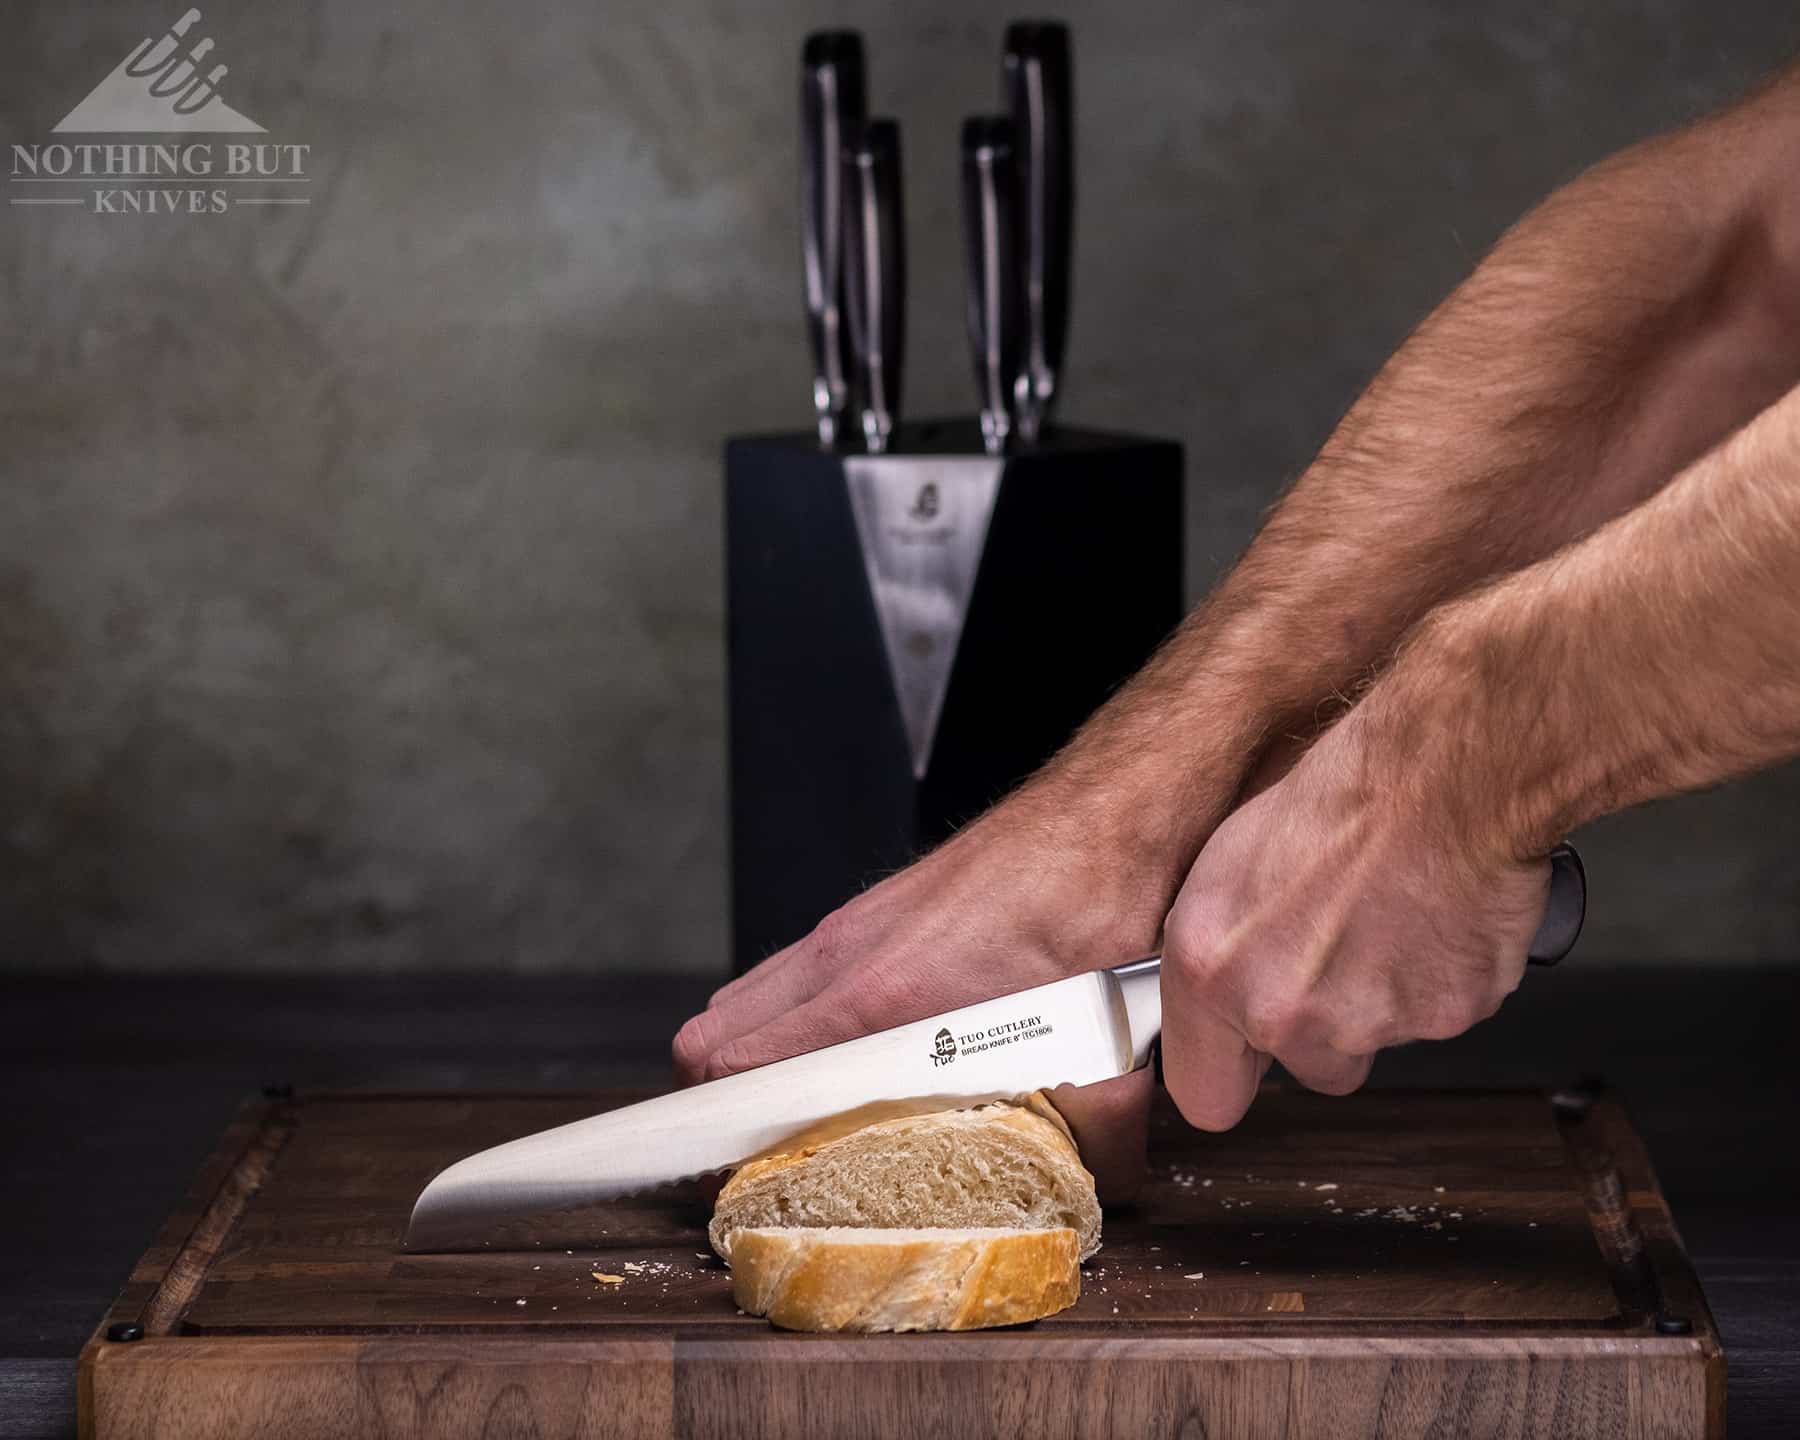 The bread knife included in the Tuo Legacy 6-piece knife set did well, but not great.